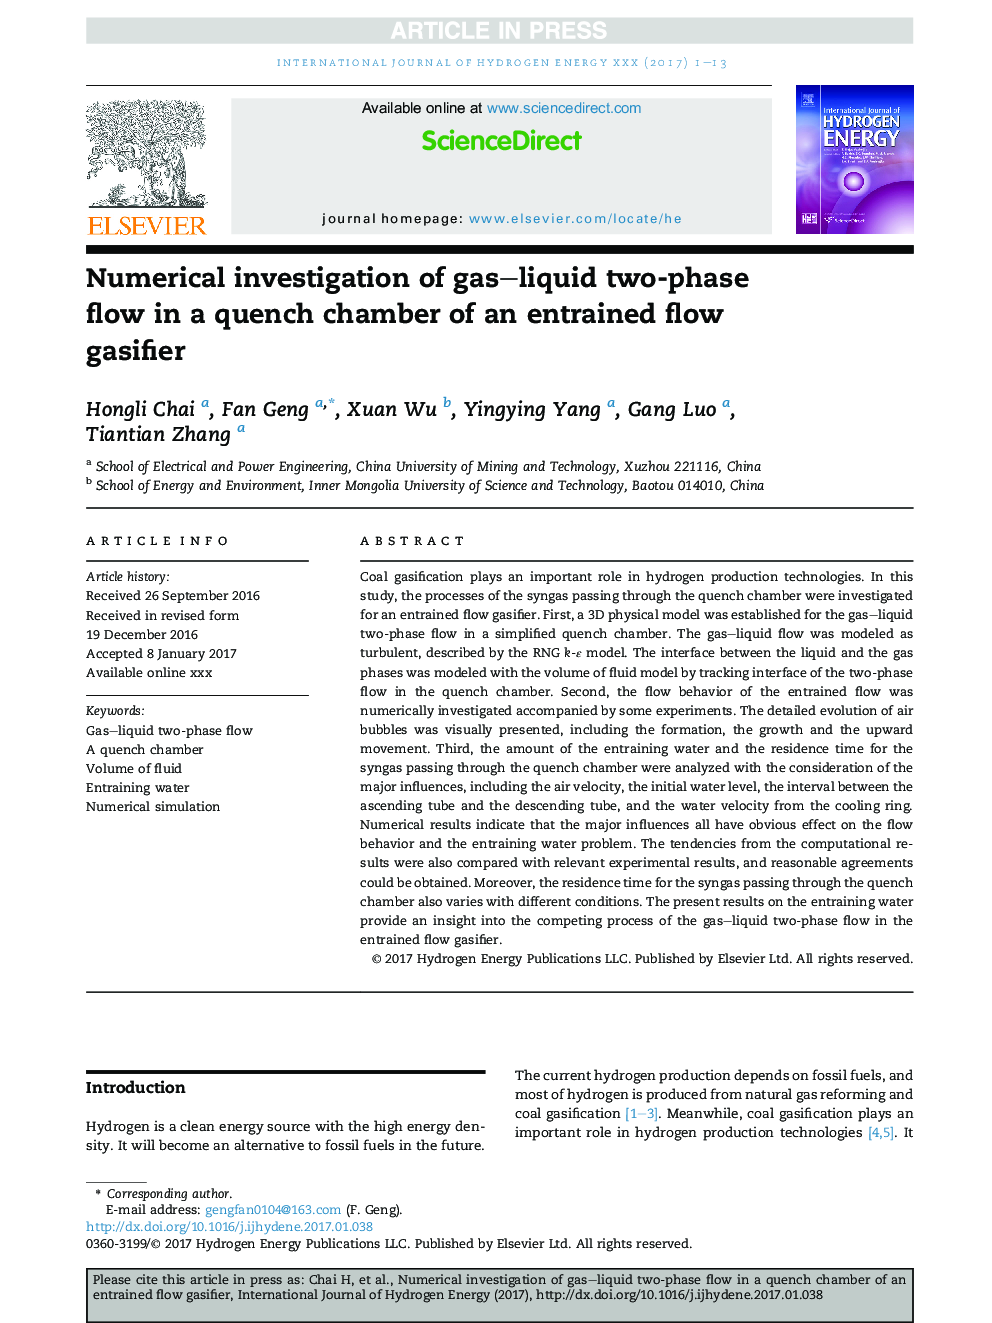 Numerical investigation of gas-liquid two-phase flow in a quench chamber of an entrained flow gasifier